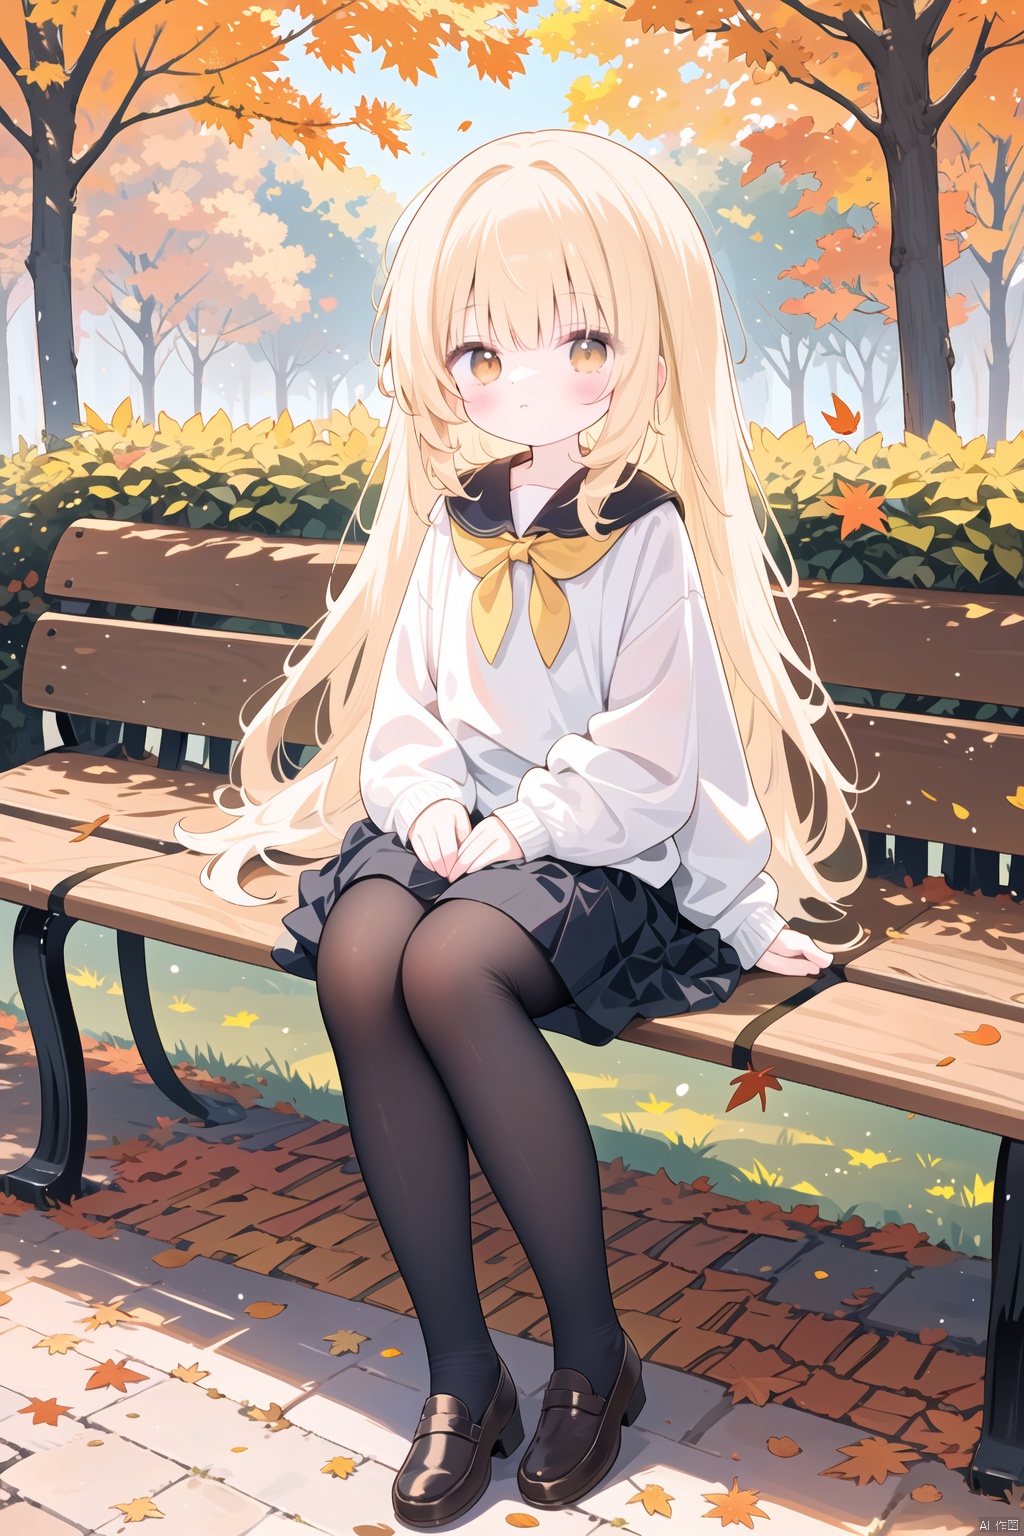  Autumn girl, park bench, falling leaves, autumn is getting stronger, delicate, lifelike, high definition, sunshine, mottled light and shadow, long golden hair and skirt, white shoes and pantyhose, autumn colors, quiet thinking , gentle and harmonious, carefully painted with details, touchable tenderness and autumn atmosphere, the girl blends with the park environment